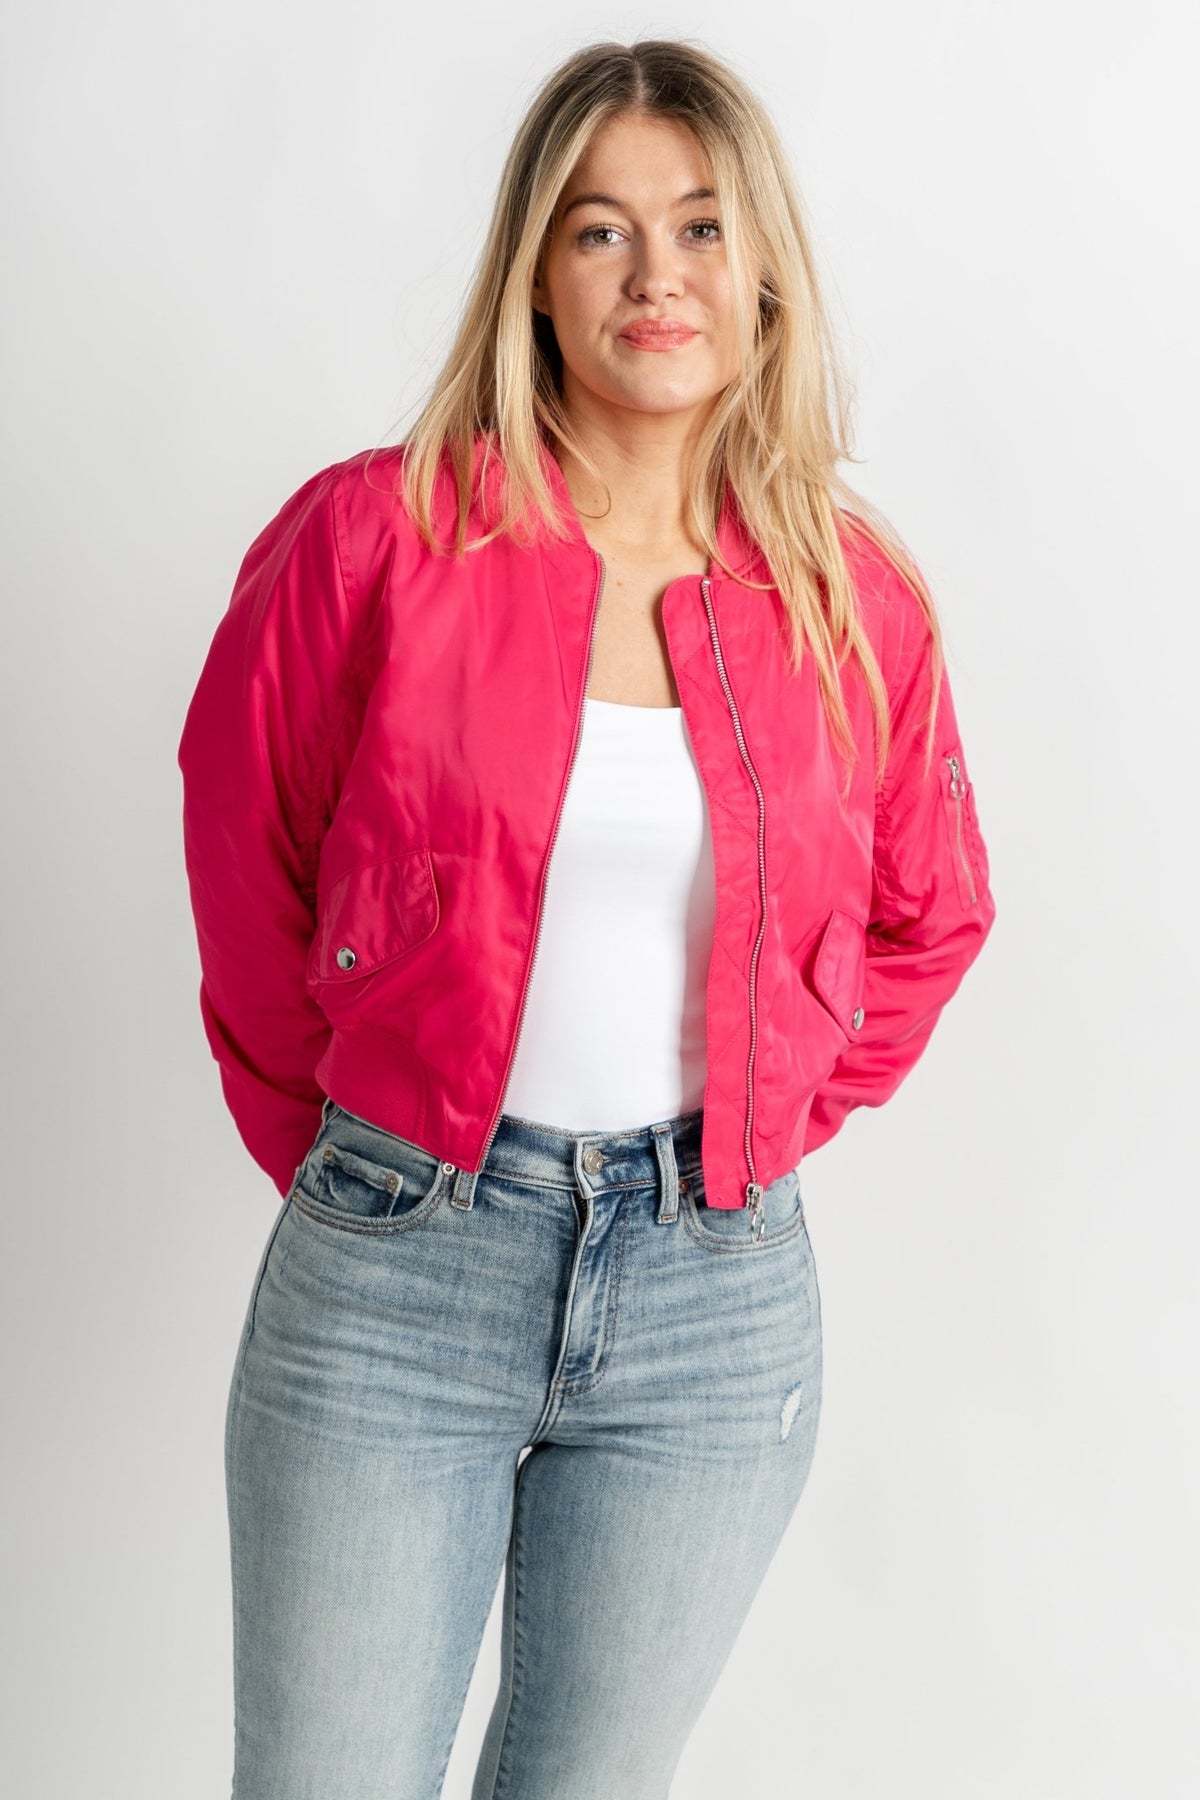 Cargo bomber jacket fuchsia - Trendy T-Shirts for Valentine's Day at Lush Fashion Lounge Boutique in Oklahoma City